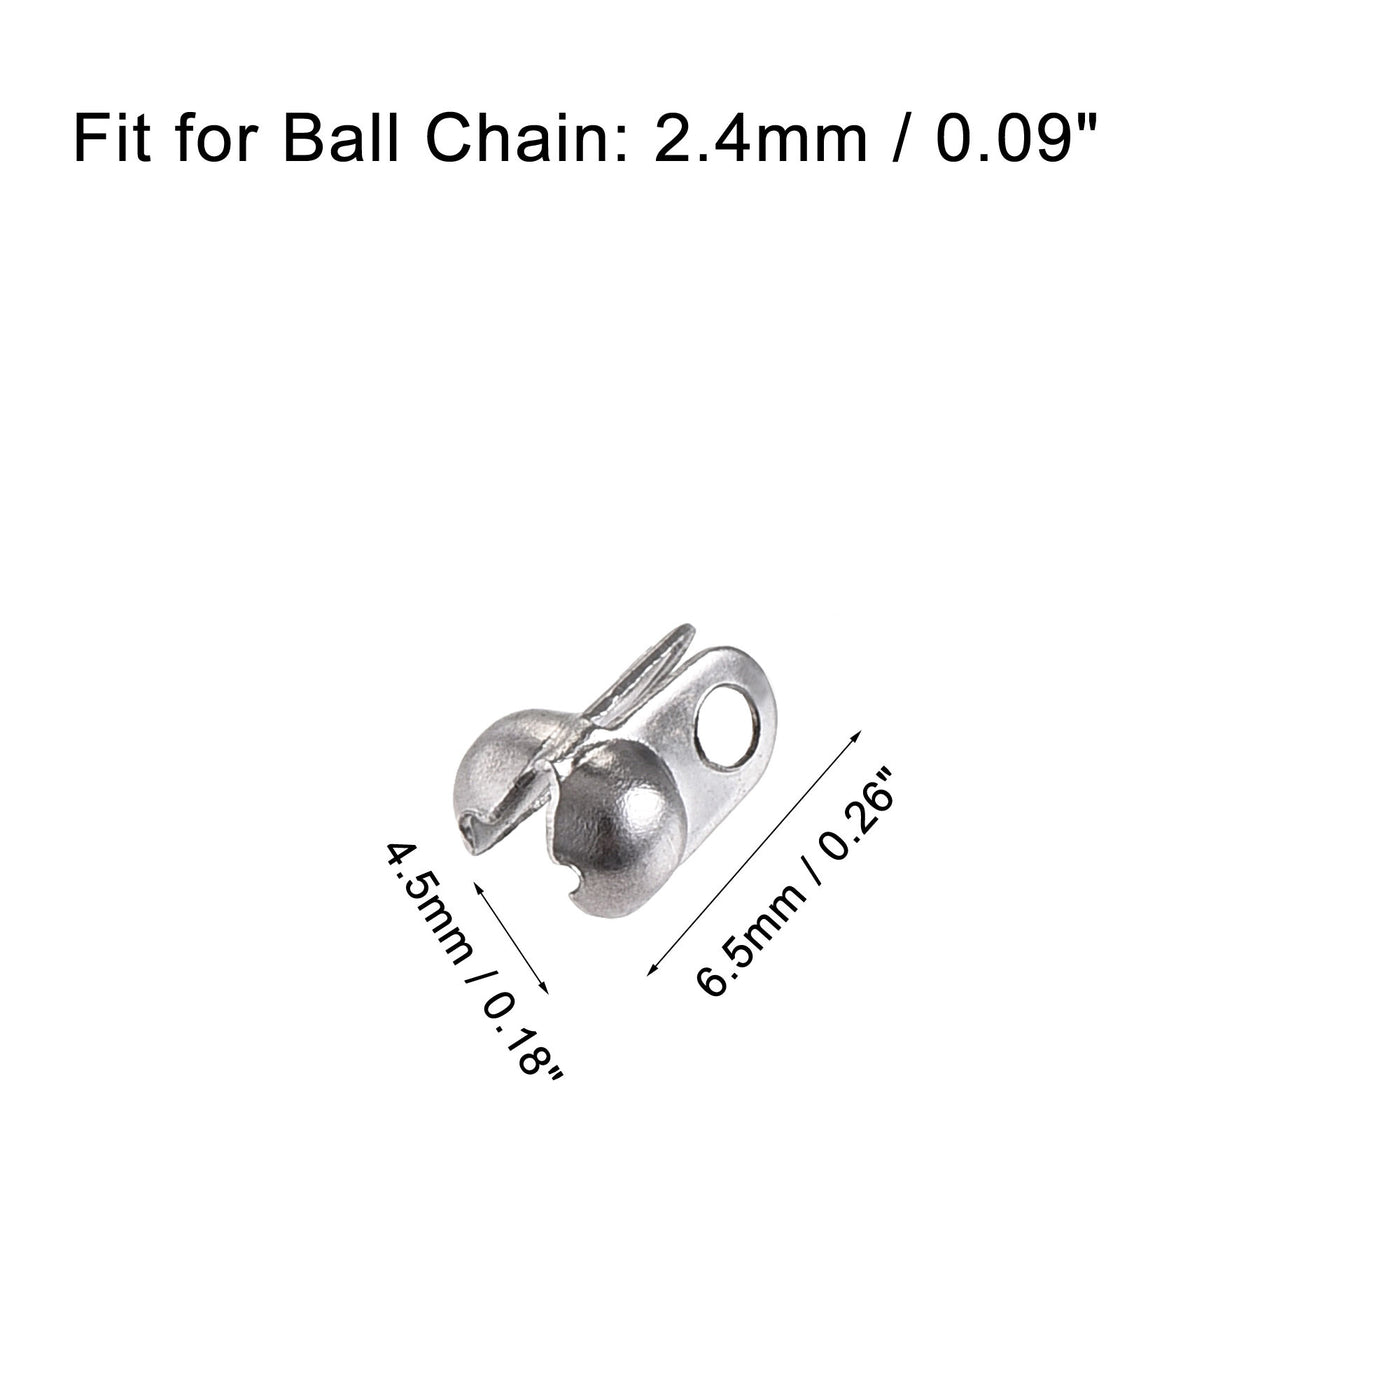 Uxcell Uxcell Ball Chain Connector, 2.4mm Ball Tips Clamshell Style Crimp Link Stainless Steel Connection, Pack of 50